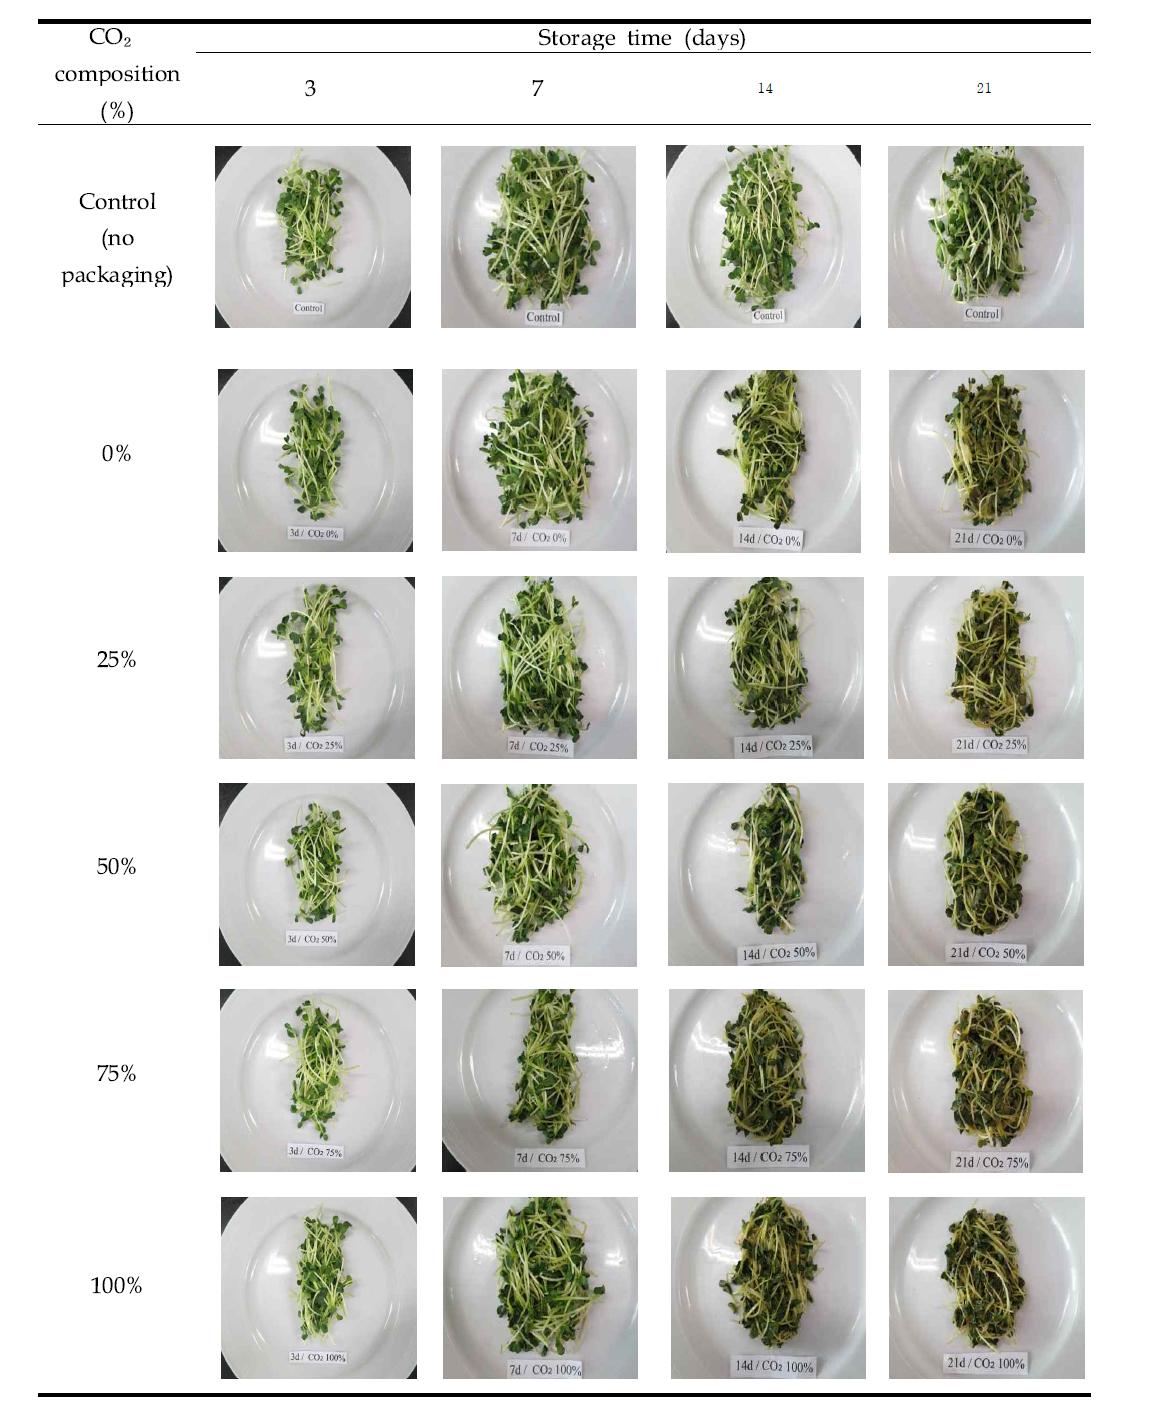 Digital photography of modified atmosphere packaging on radish sprouts for 21 days at 4±2oC.